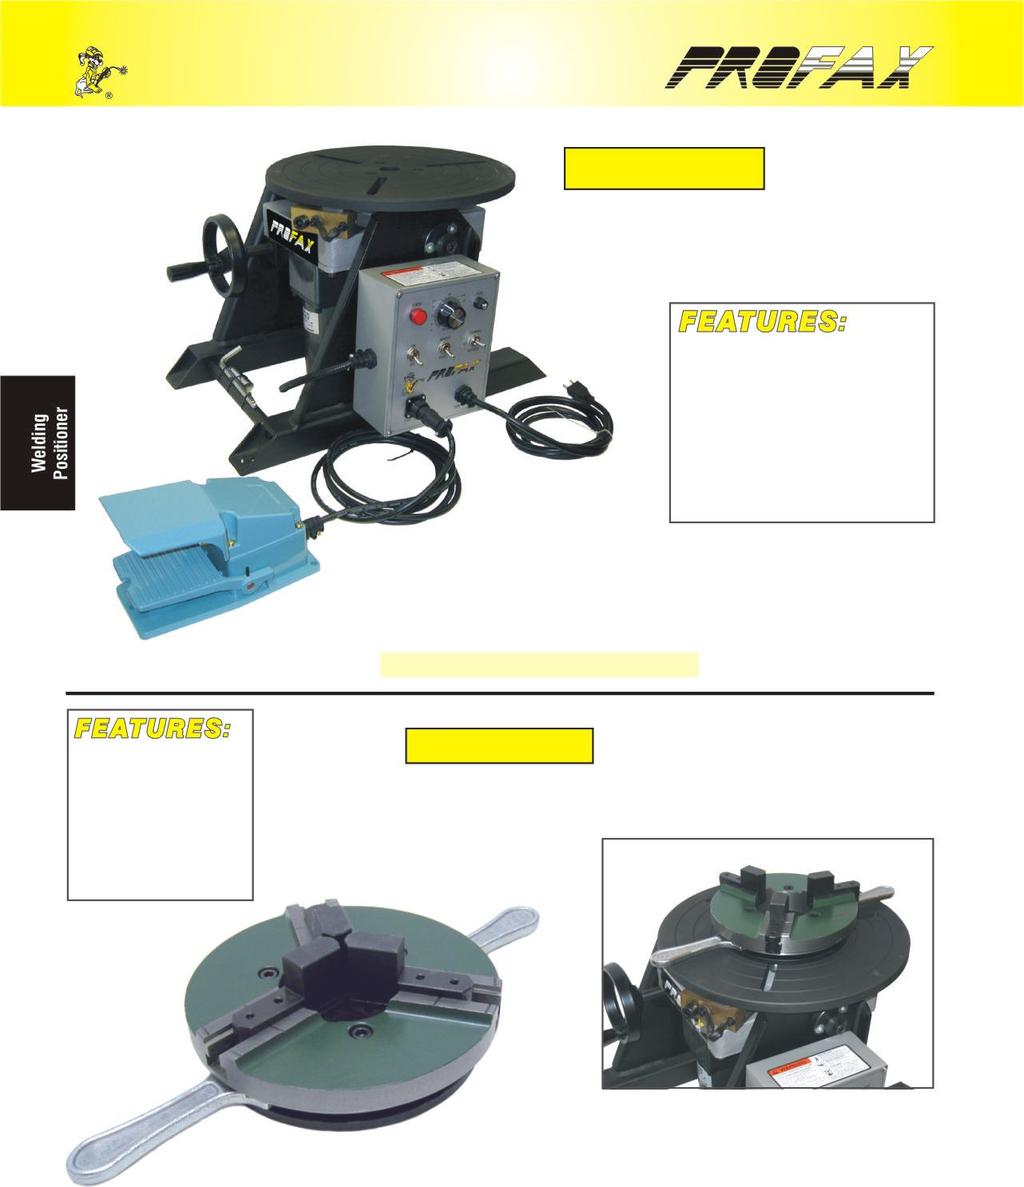 WELDING POSITIONER WP-250 13-3/4 Diameter Table 0 to 5.5 RPM Rotation Speed Manual Tilt Adjustment 0 to 90 Tilting Angle Standard w/foot Control Switch Shipping Weight 113 lbs.